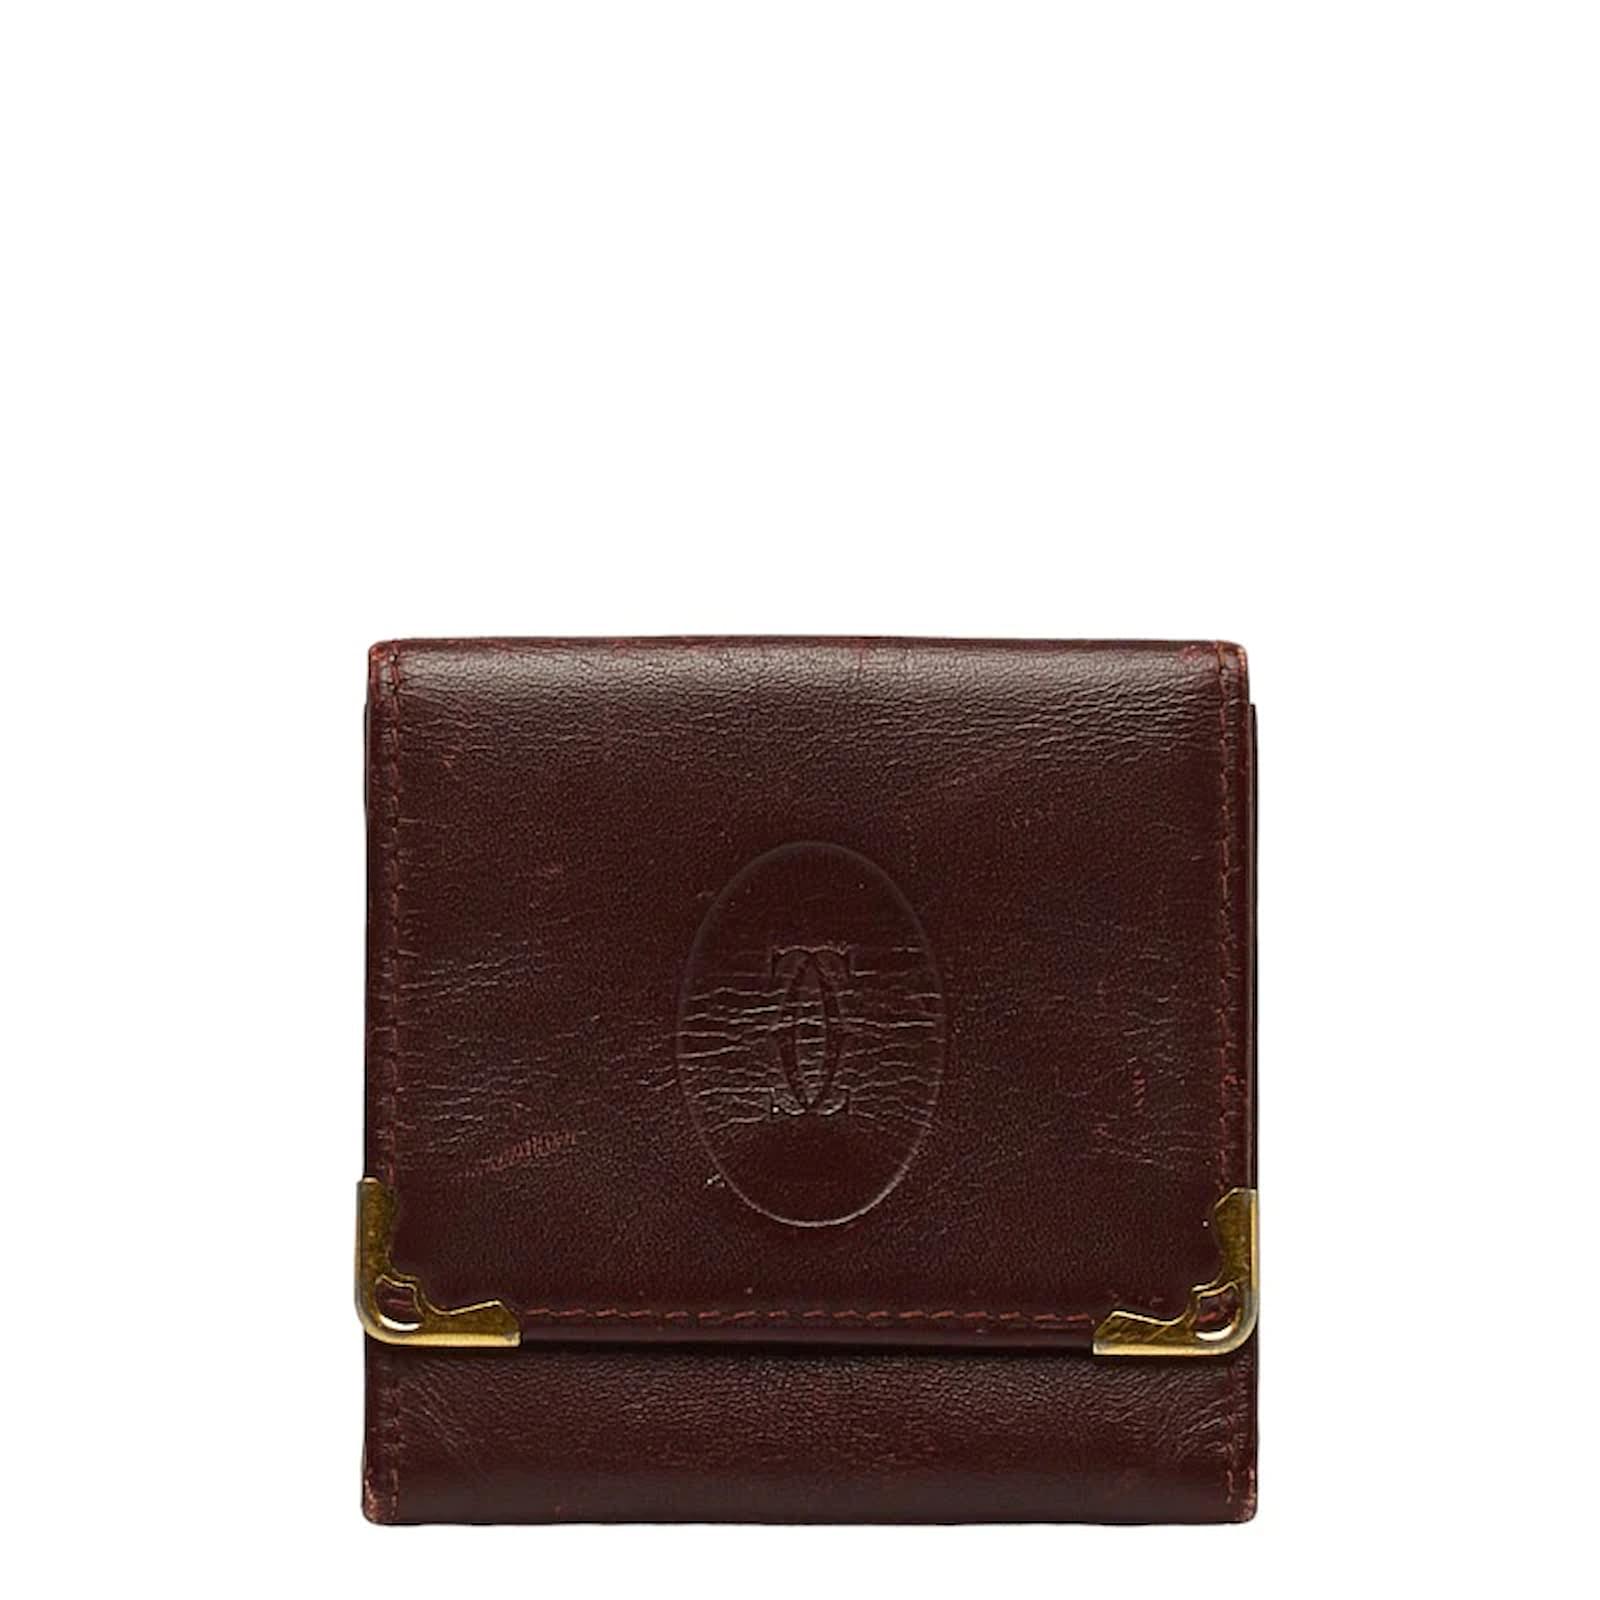 Used BC/Used] CARTIER Coin Case Coin Purse Must Line Bordeaux Gold Border  Square Unisex Coin Case 20439721